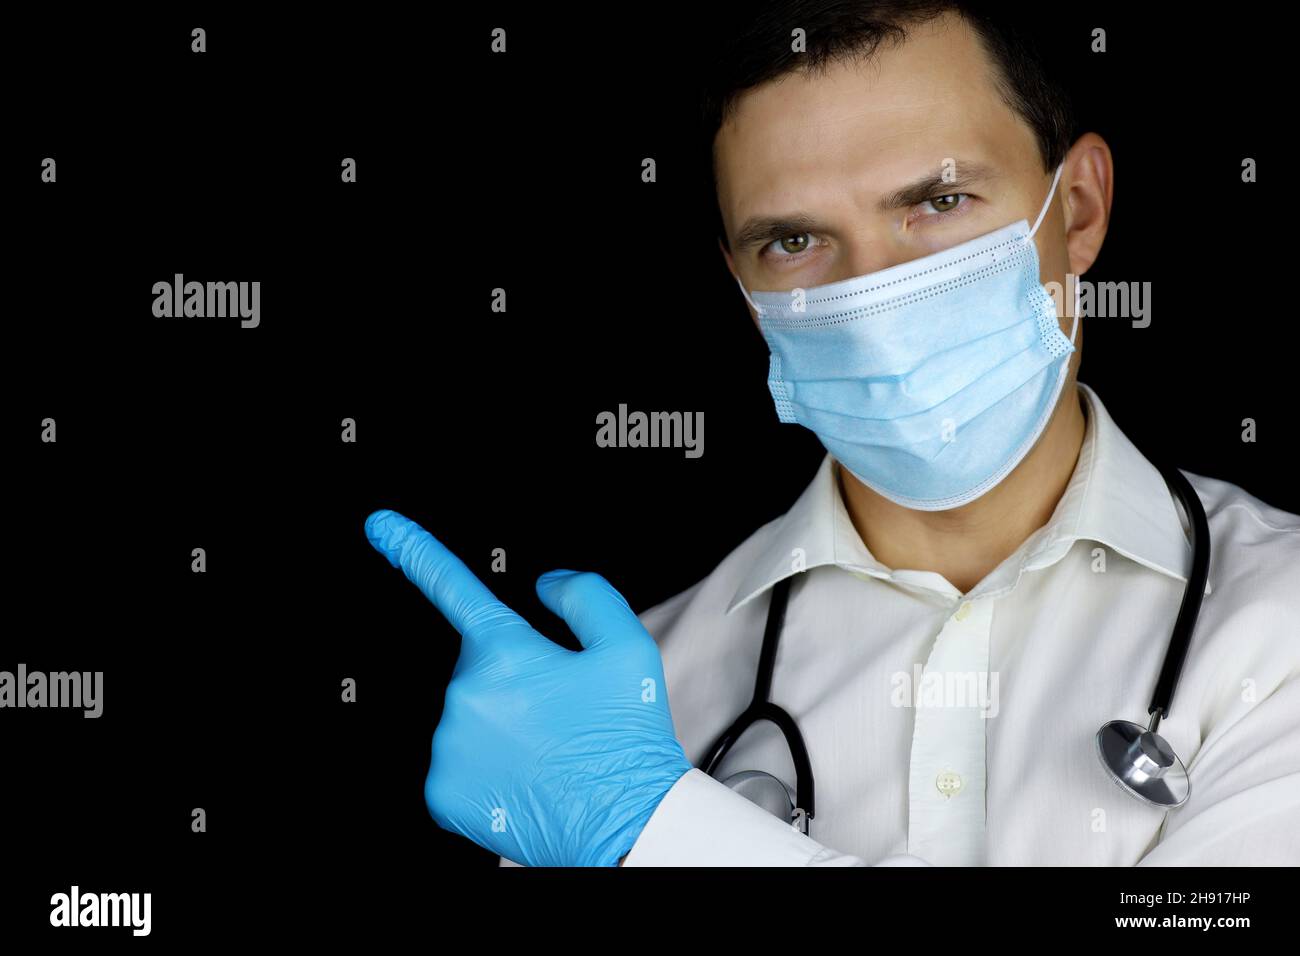 Doctor in disposable face and medical gloves mask points up with his finger. Concept of call for participation, health care, coronavirus protection Stock Photo